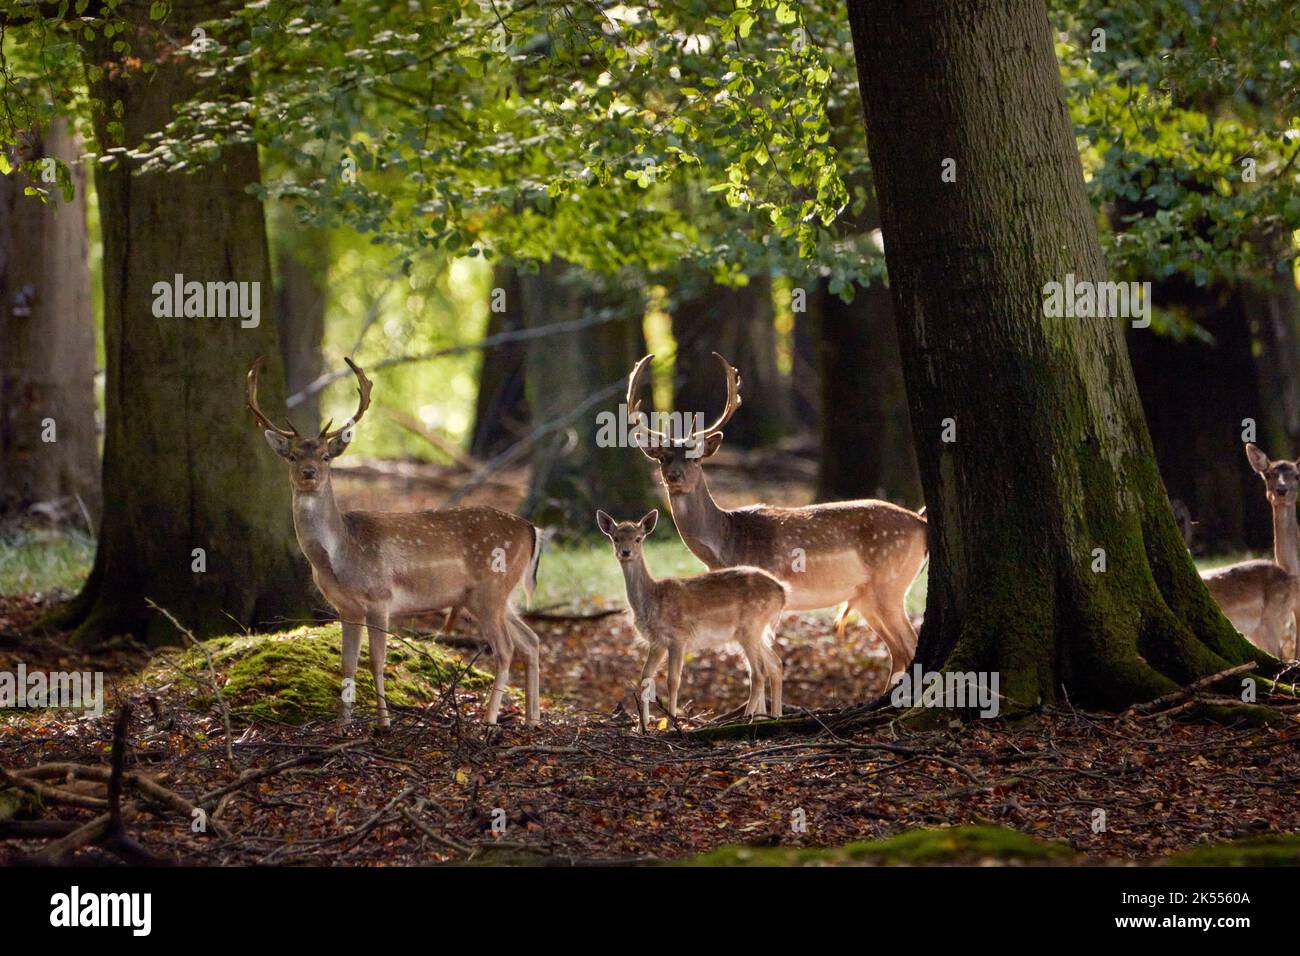 Deer family in forest Stock Photo